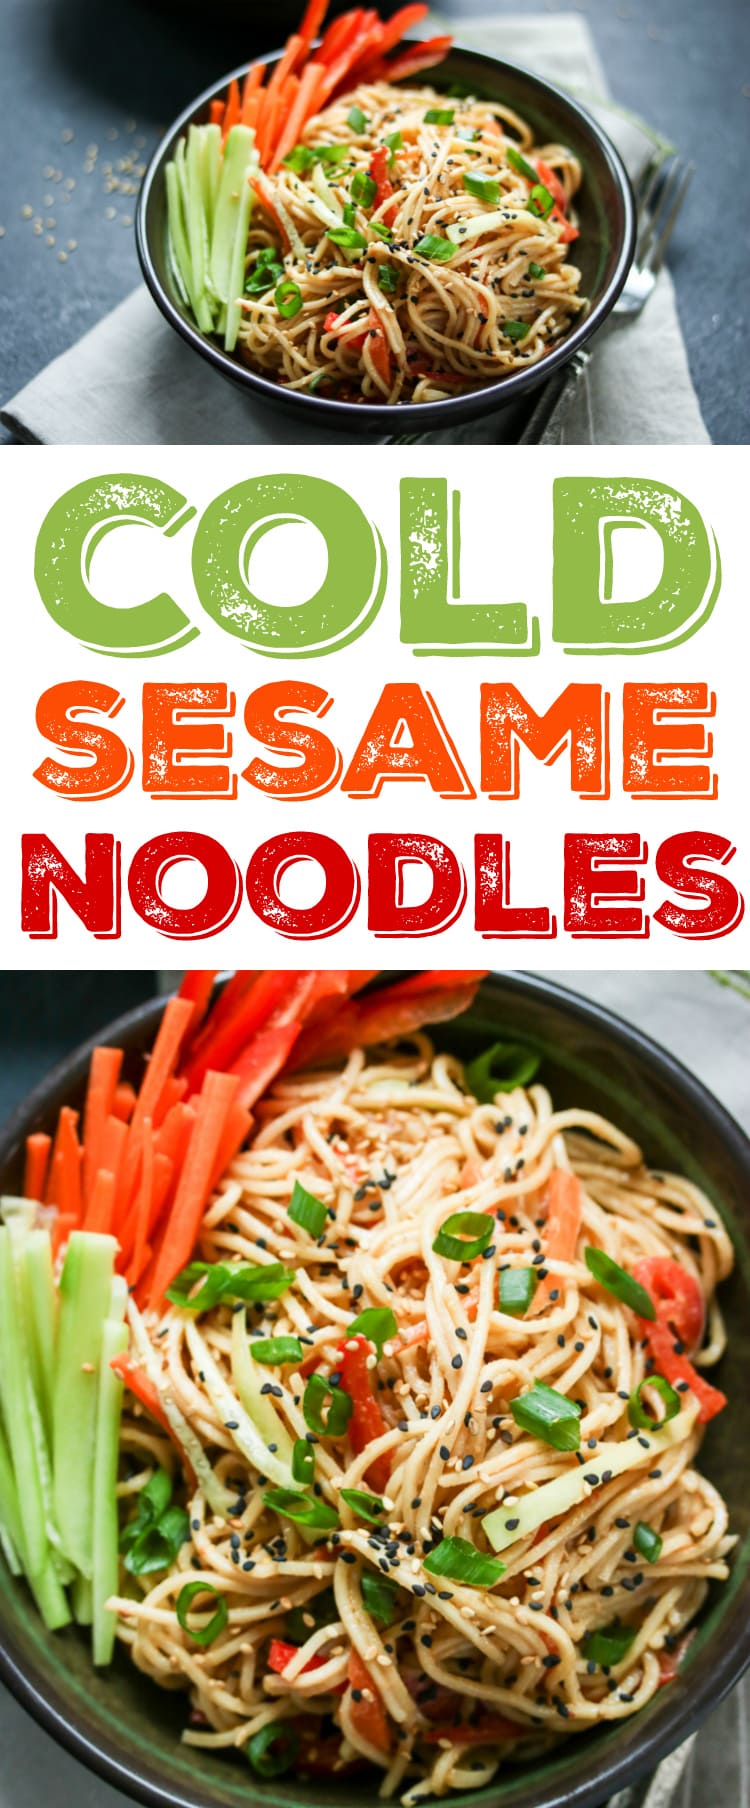 Get that perfect take-out taste at home with this easy cold sesame noodles recipe!